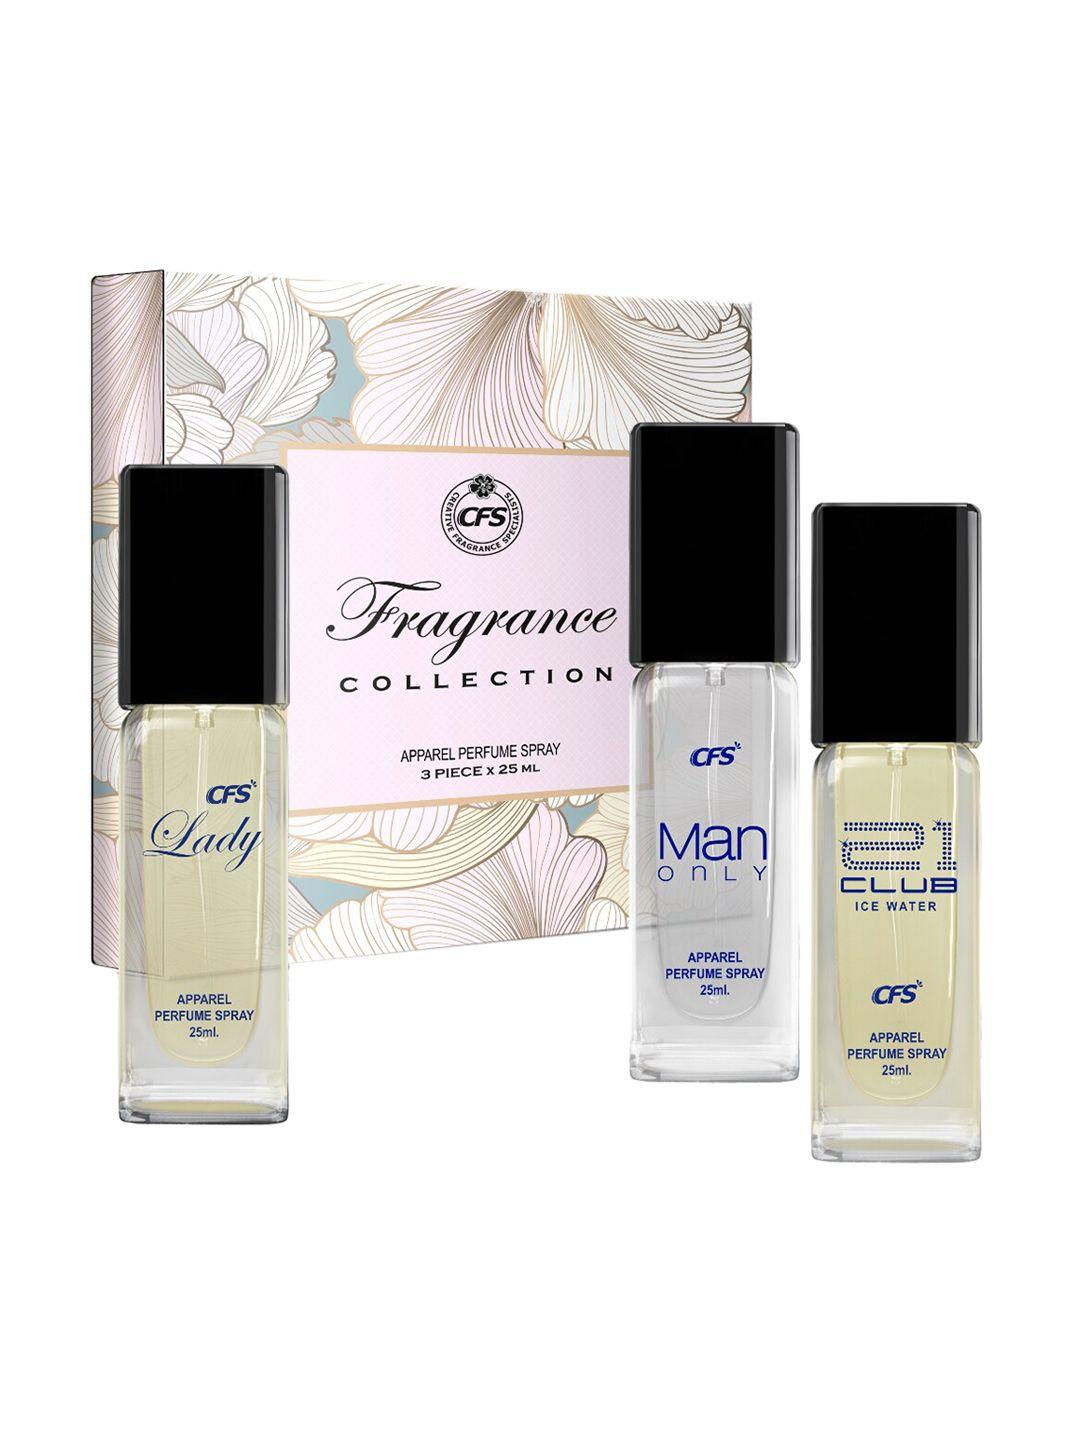 cfs fragrance perfume collection - lady + man only black + 21 ice water - 25ml each